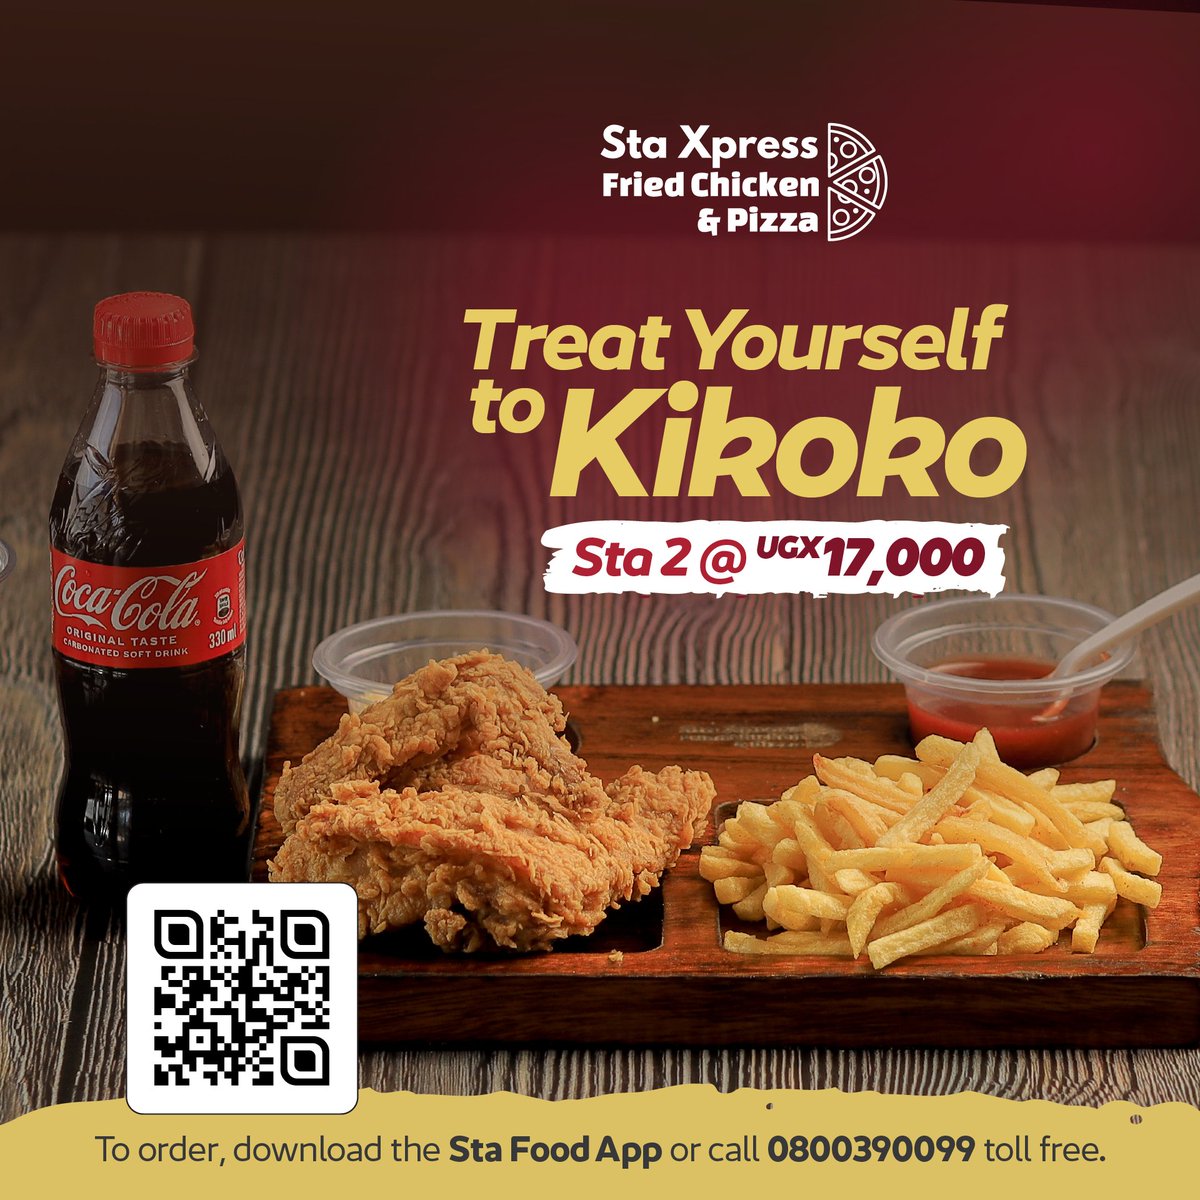 Treat yourself to some kikoko today @StaXpress. It is the perfect midweek reward for your hard work and a boost to carry you through the remainder of the week. To order, use the Sta Food App or call the toll-free number on the poster below. #StaXpressFoodies #NBSUpdates